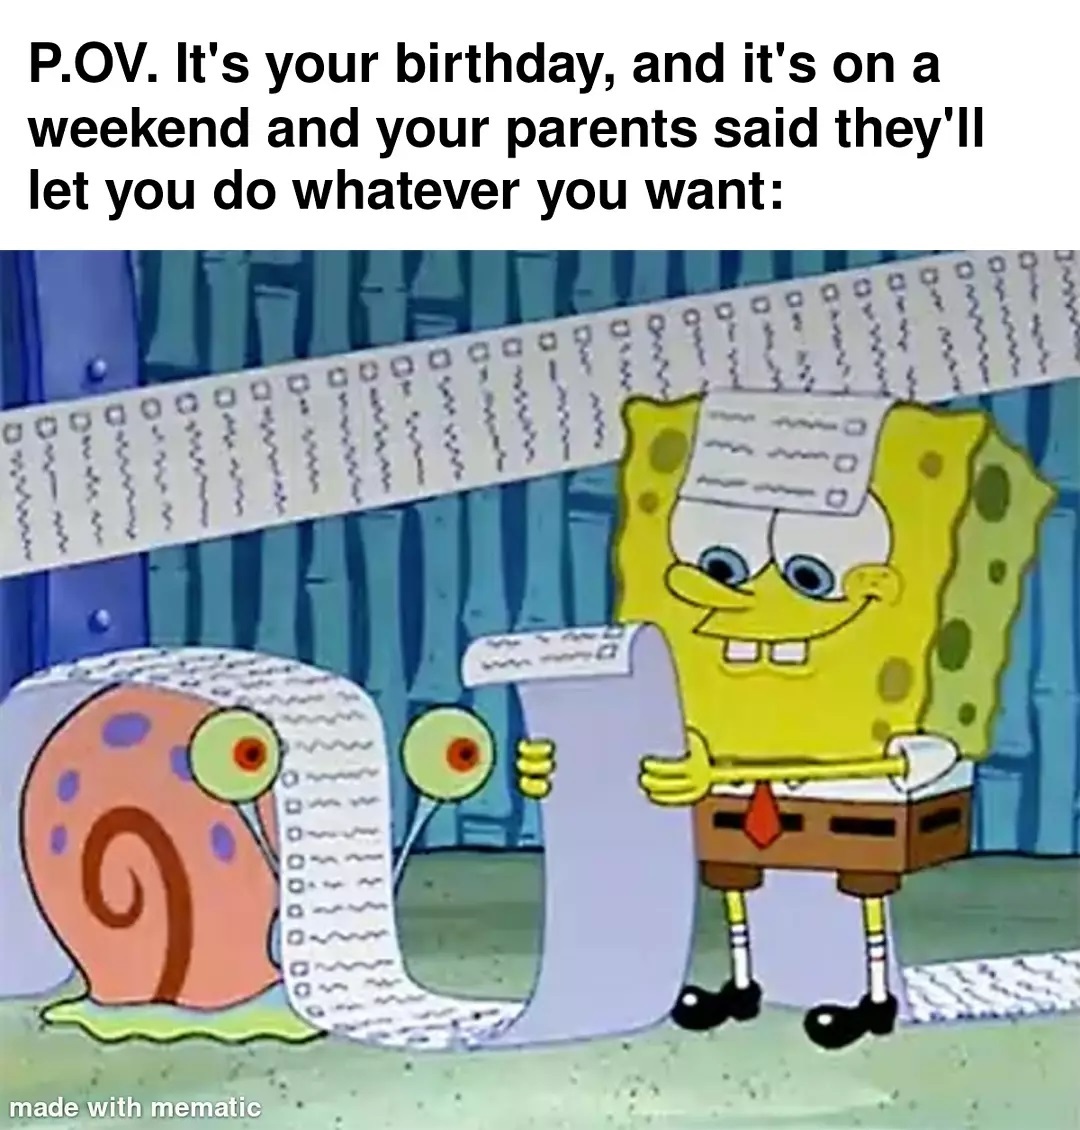 P.OV. It's your birthday, and it's on a weekend and your parents said they'll let you do whatever you want: